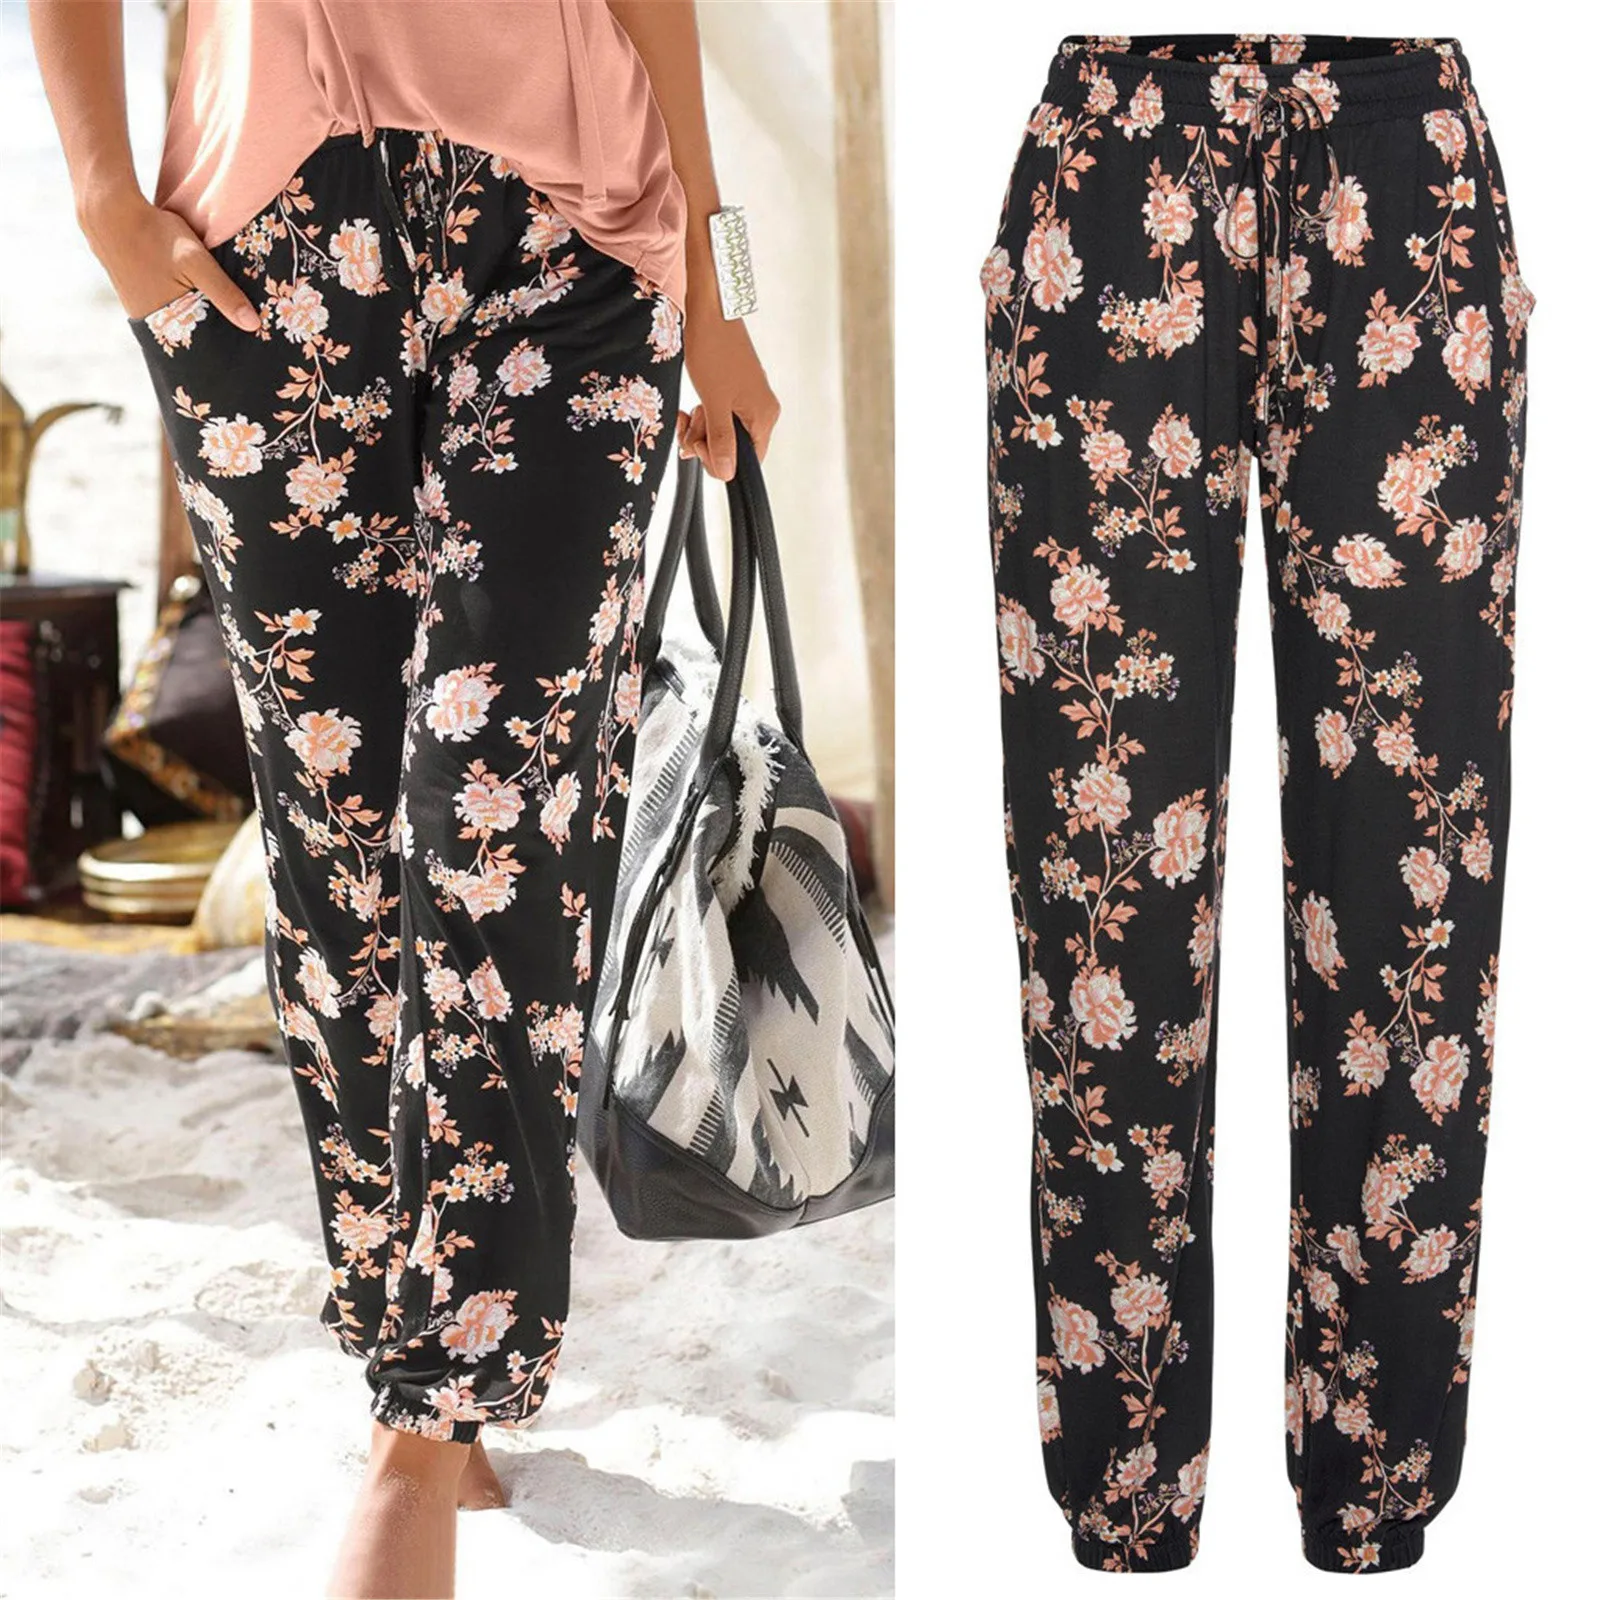 

Summer New Vintage Boho Wide Leg Pants 2021 High Waist Loose Floral Print Long Women Trousers Casual Lady Holiday Beach Pants